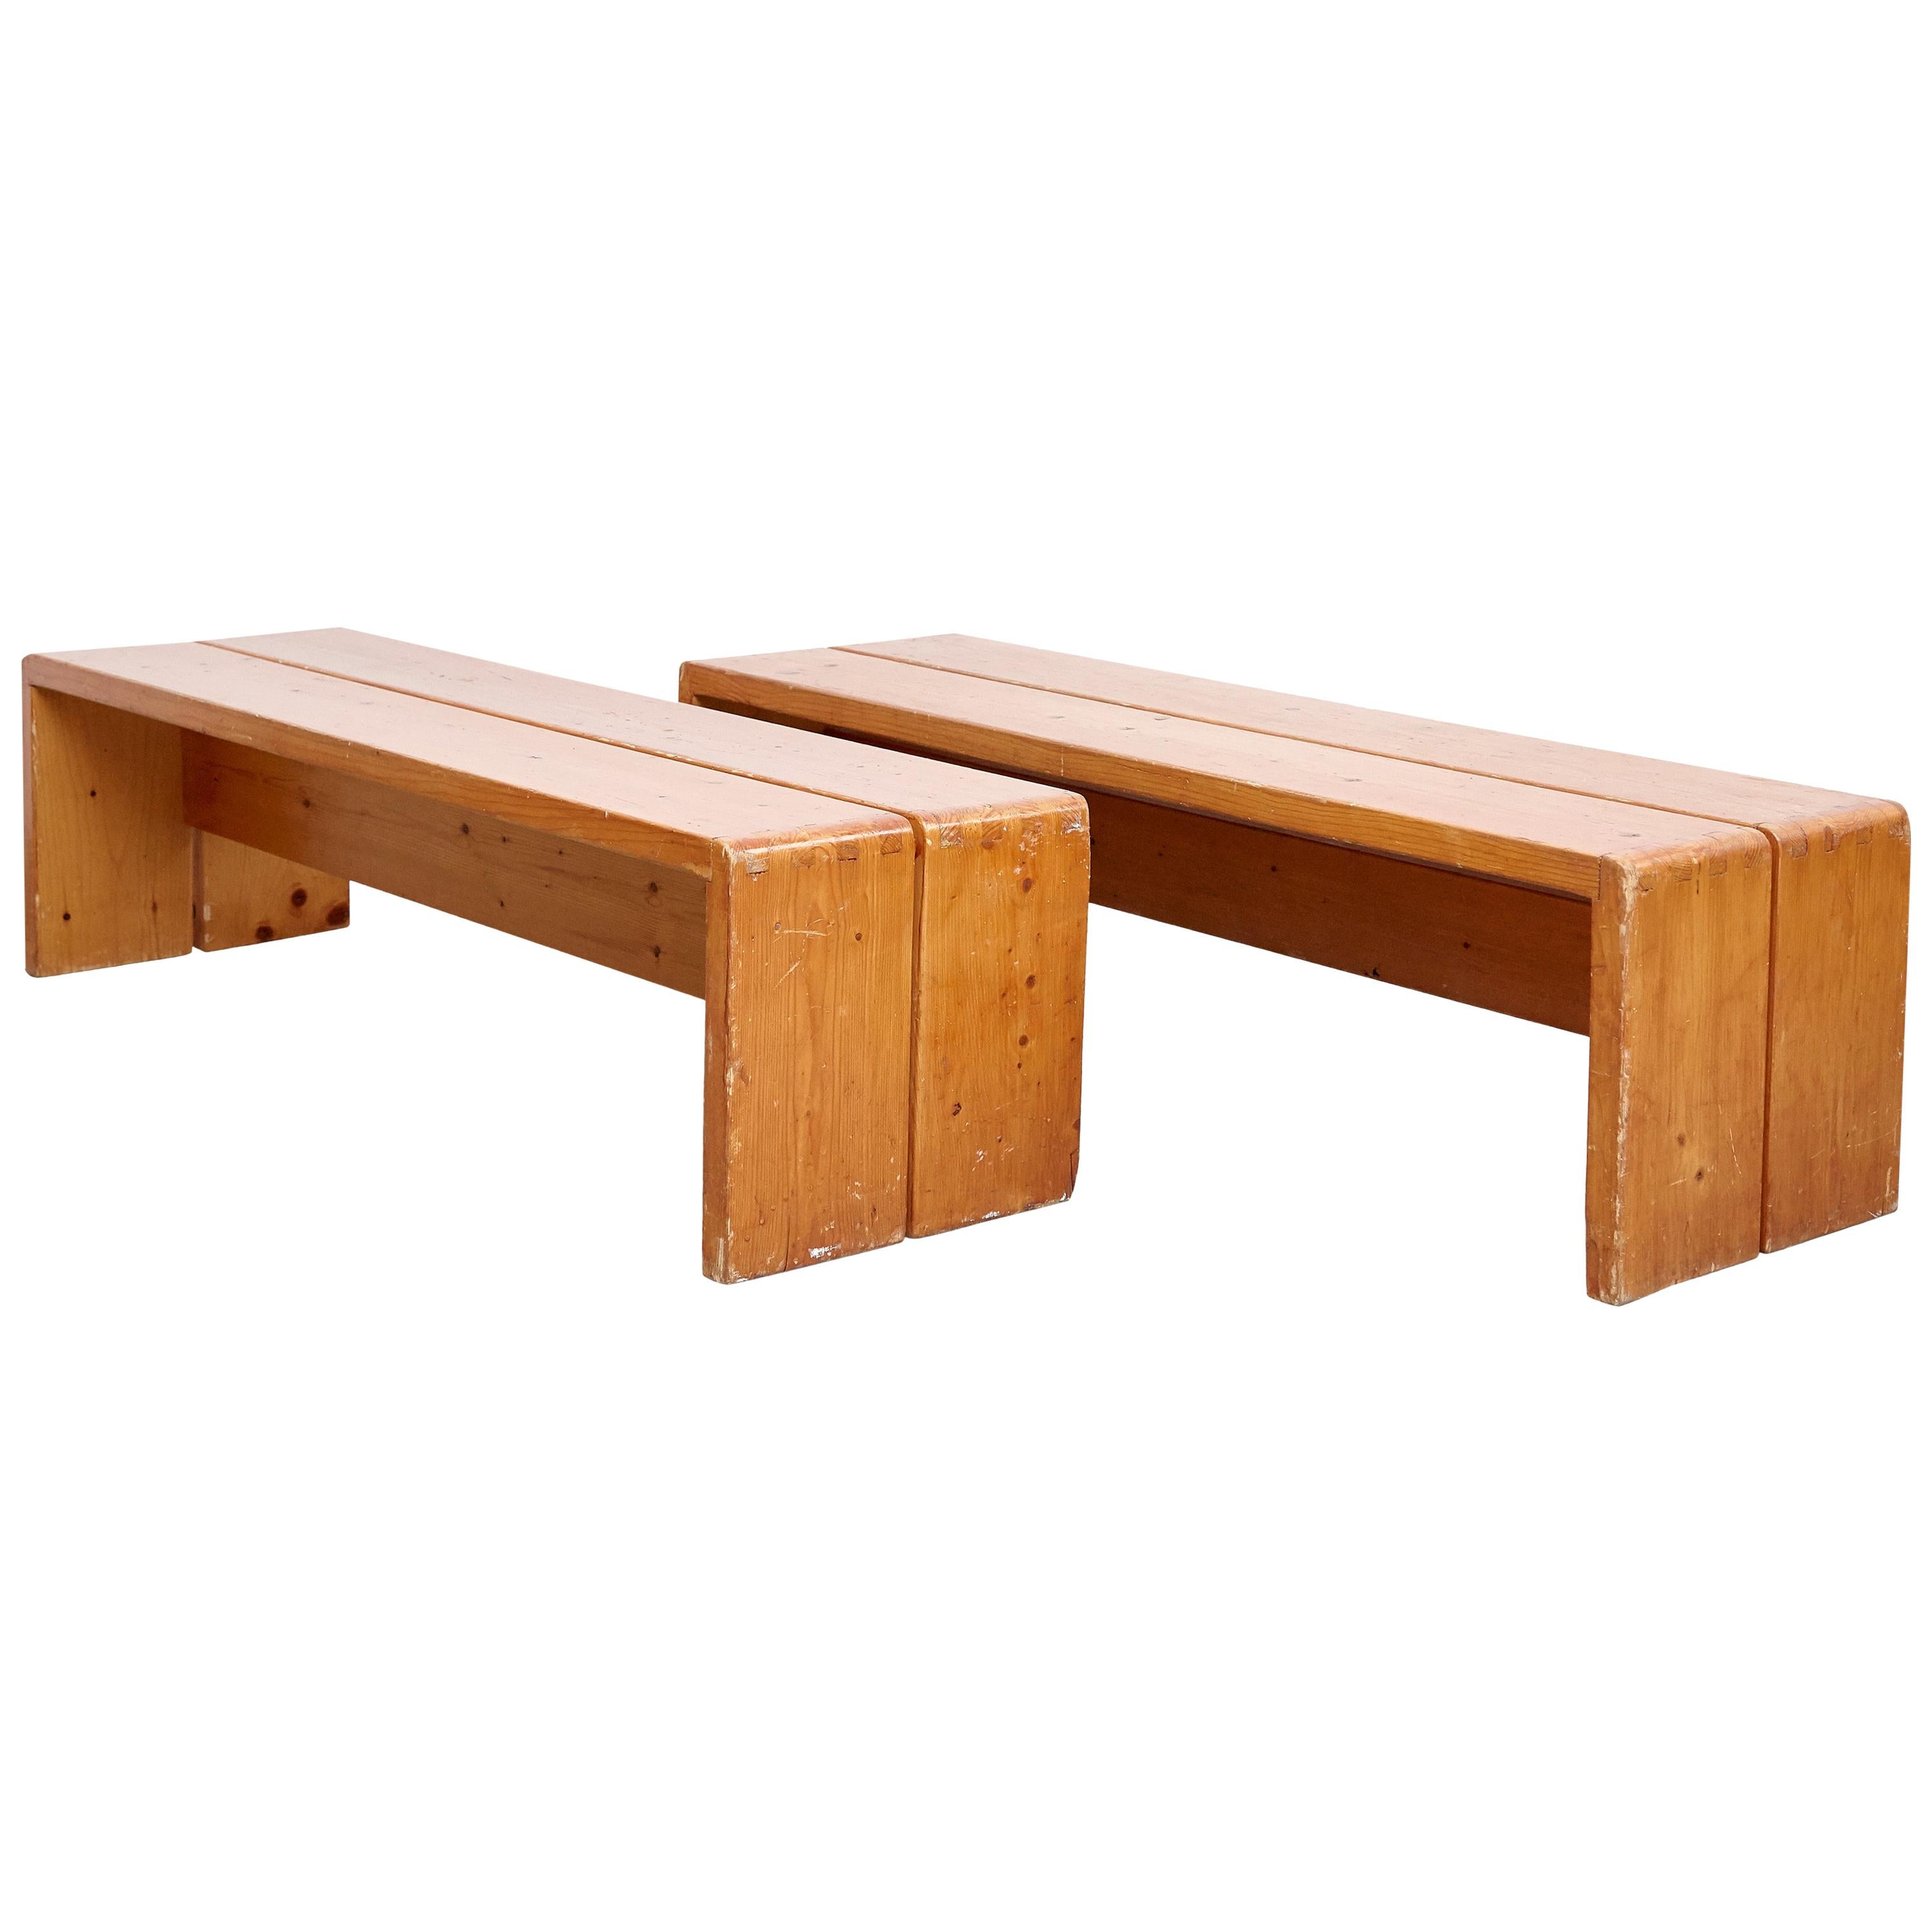 Charlotte Perriand, Pair of Large Wood Bench for Les Arcs, circa 1960